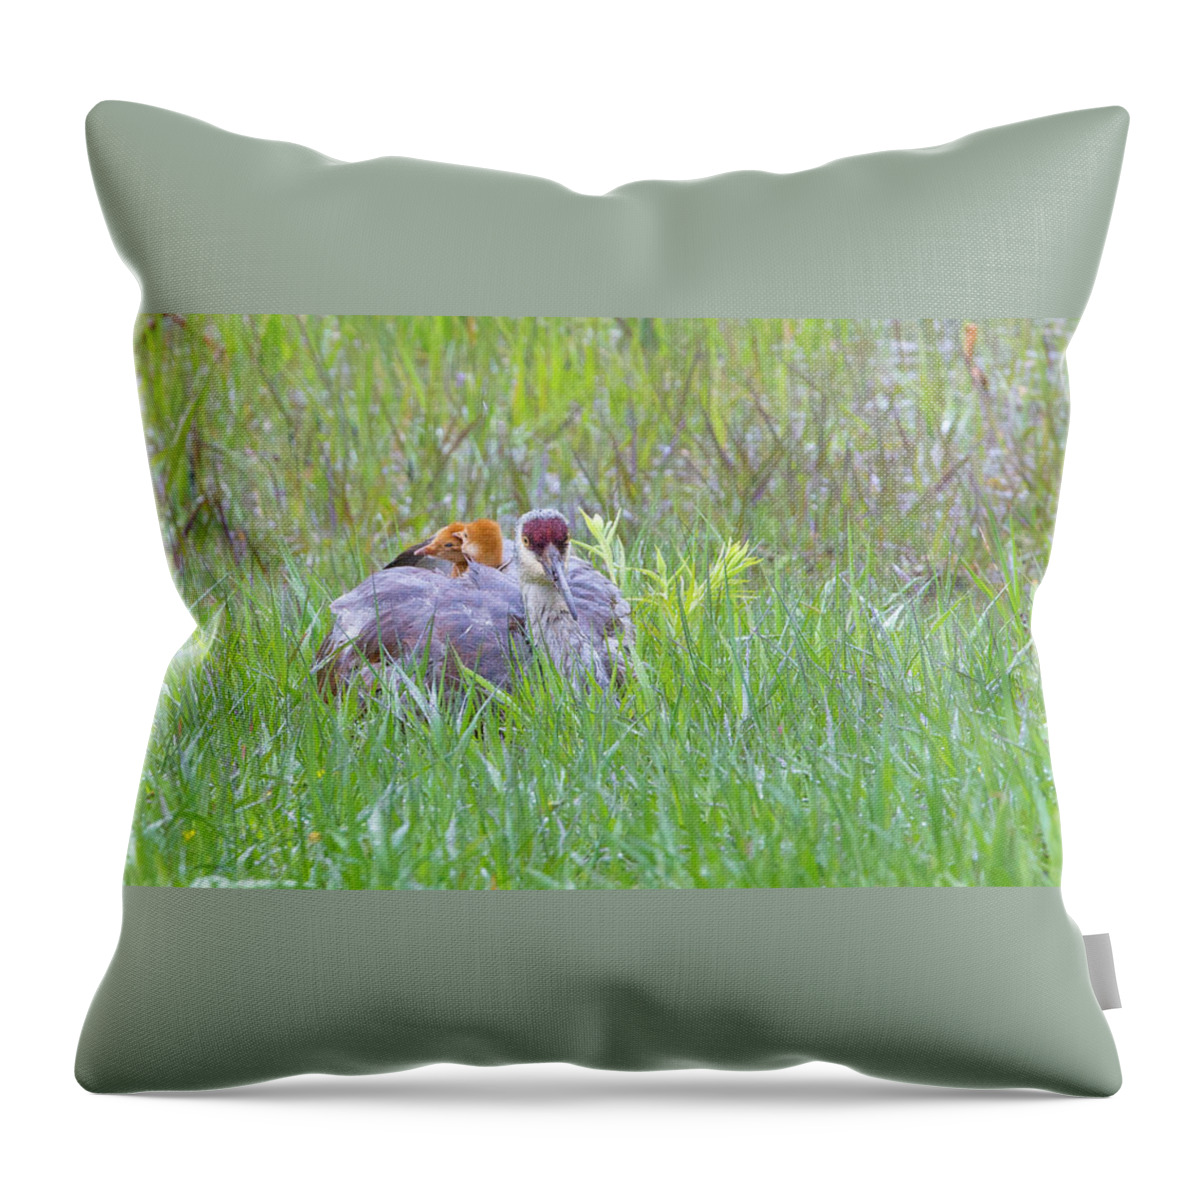 2019 Throw Pillow featuring the photograph Double Down by Kevin Dietrich